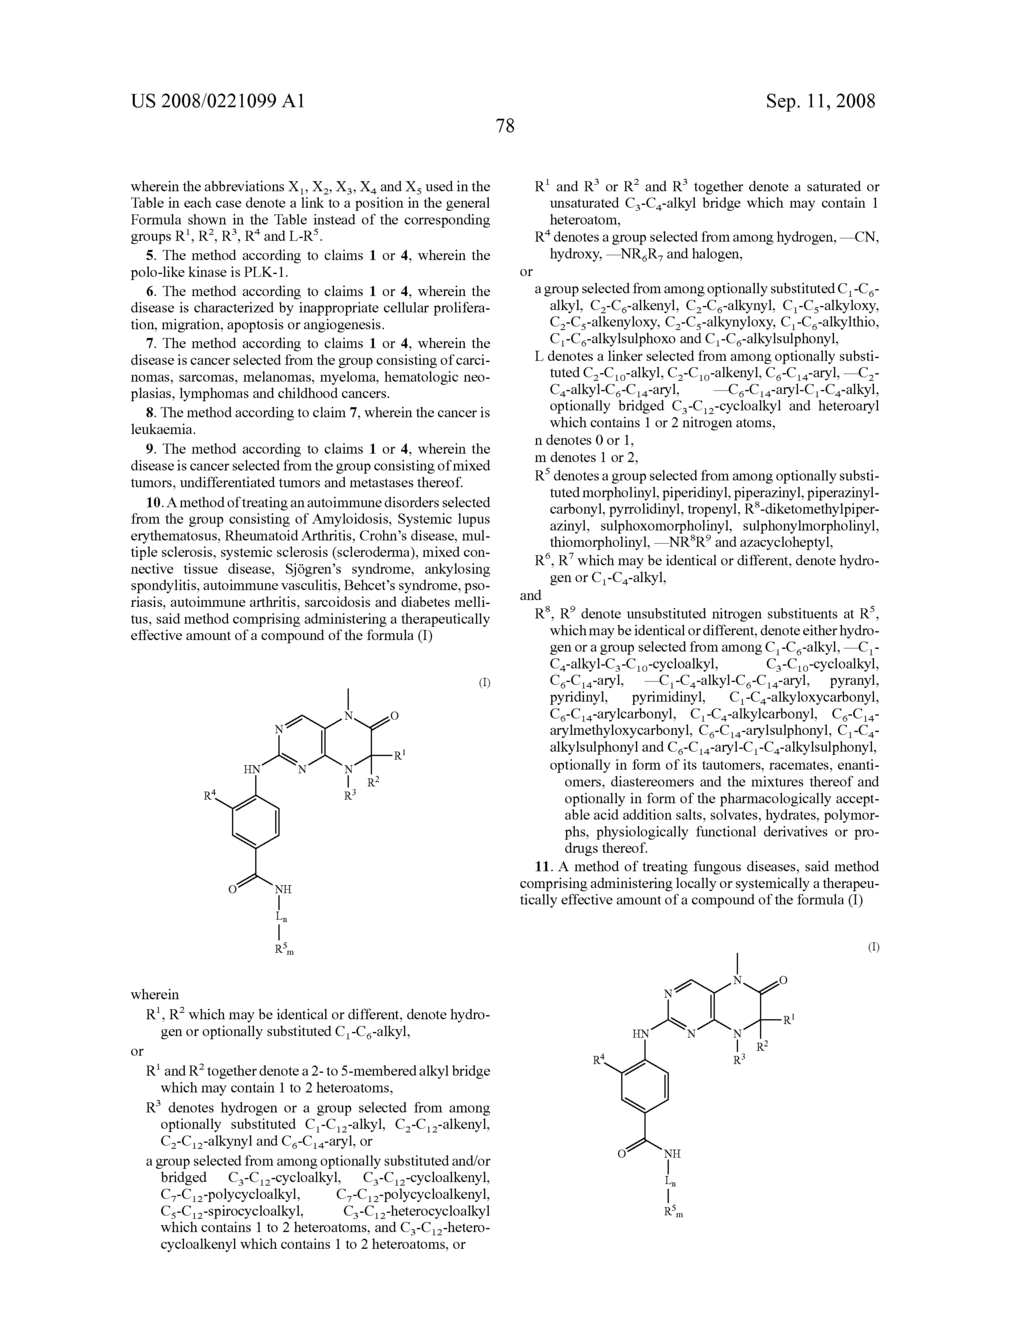 DIHYDROPTERIDINONES FOR THE TREATMENT OF CANCER DISEASES - diagram, schematic, and image 79